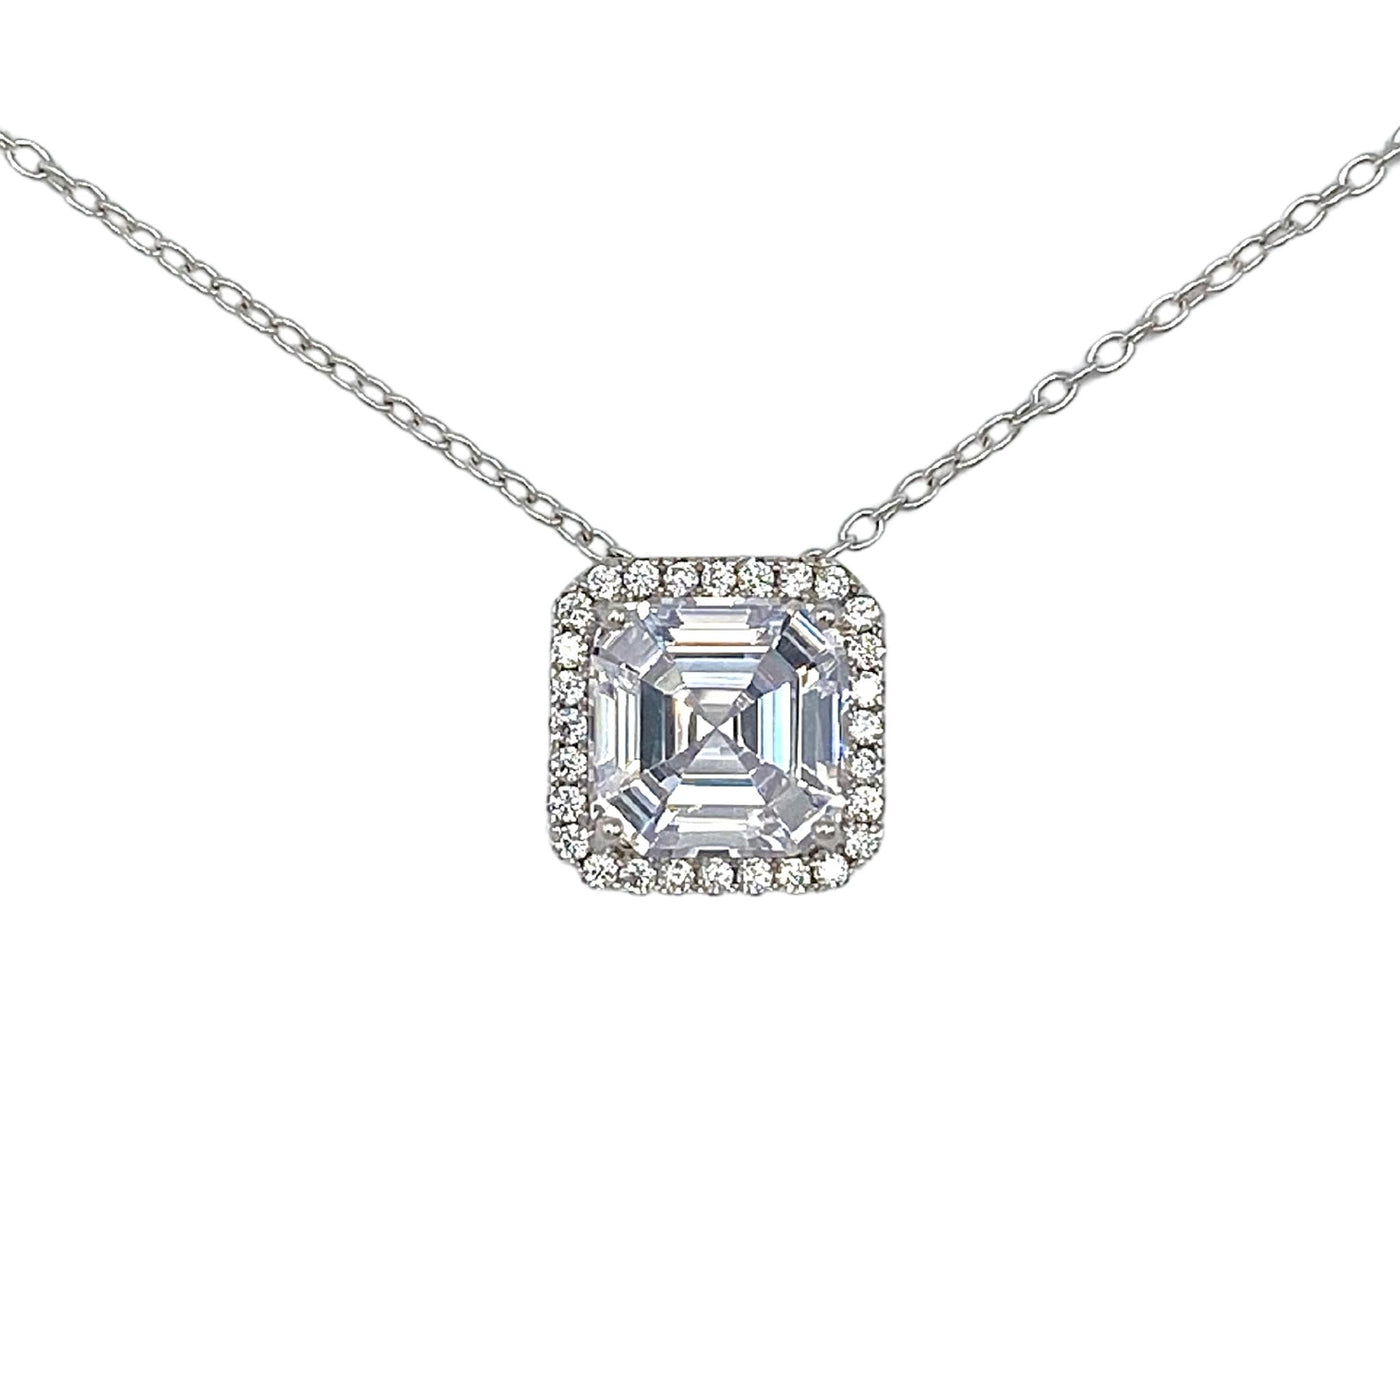 Silver necklace with asscher cut charm